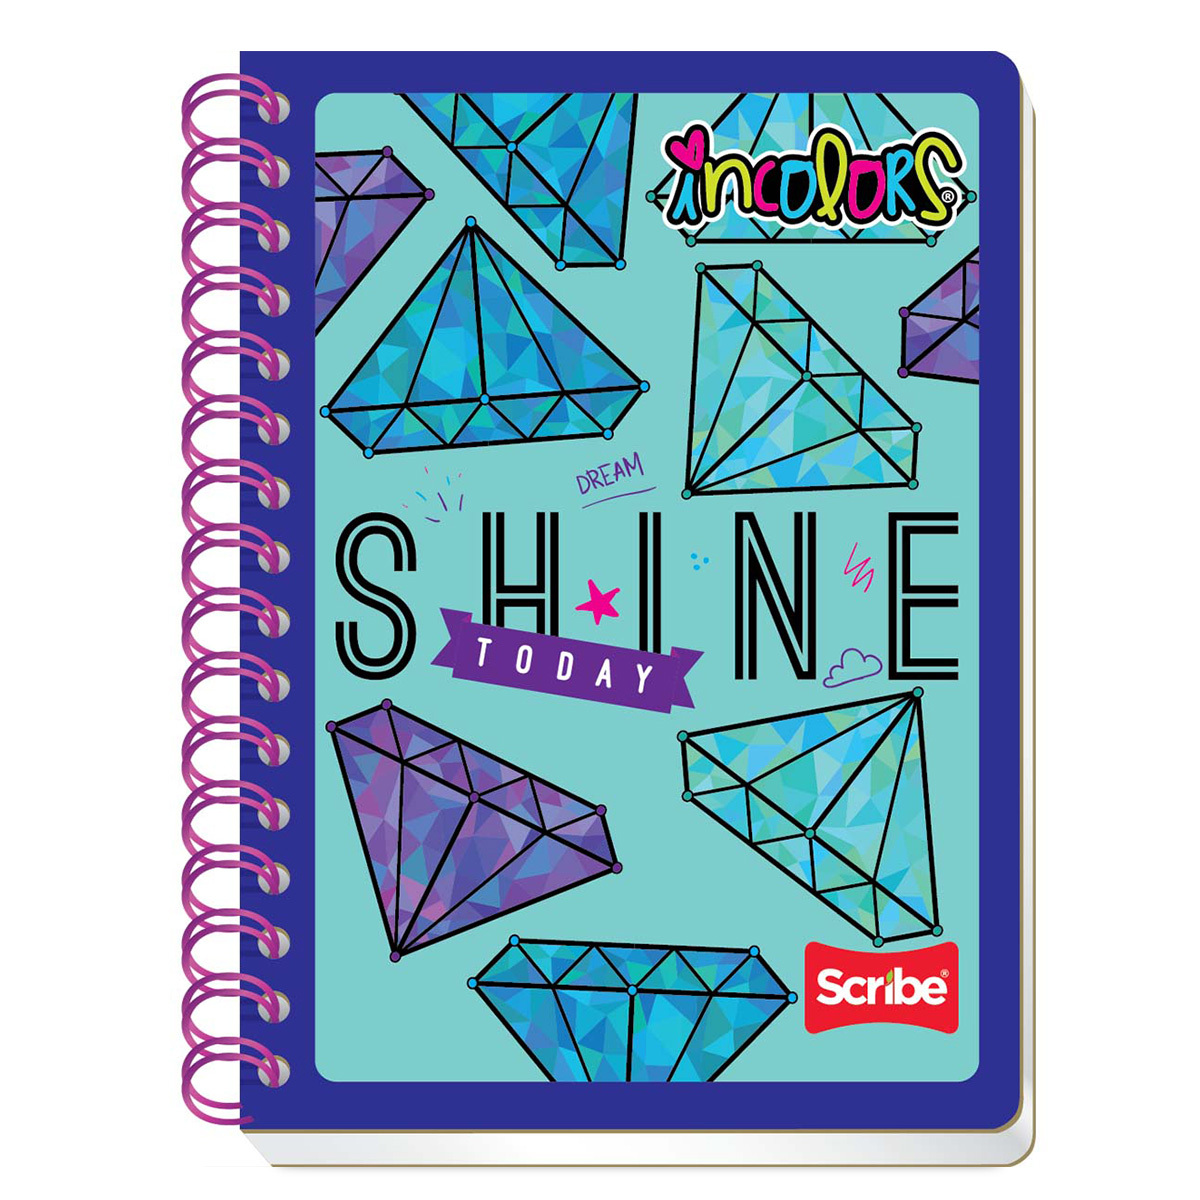 CUADERNO FORMA FRANCESA SCRIBE INCOLORS (100 HJS.) | Office Depot Mexico